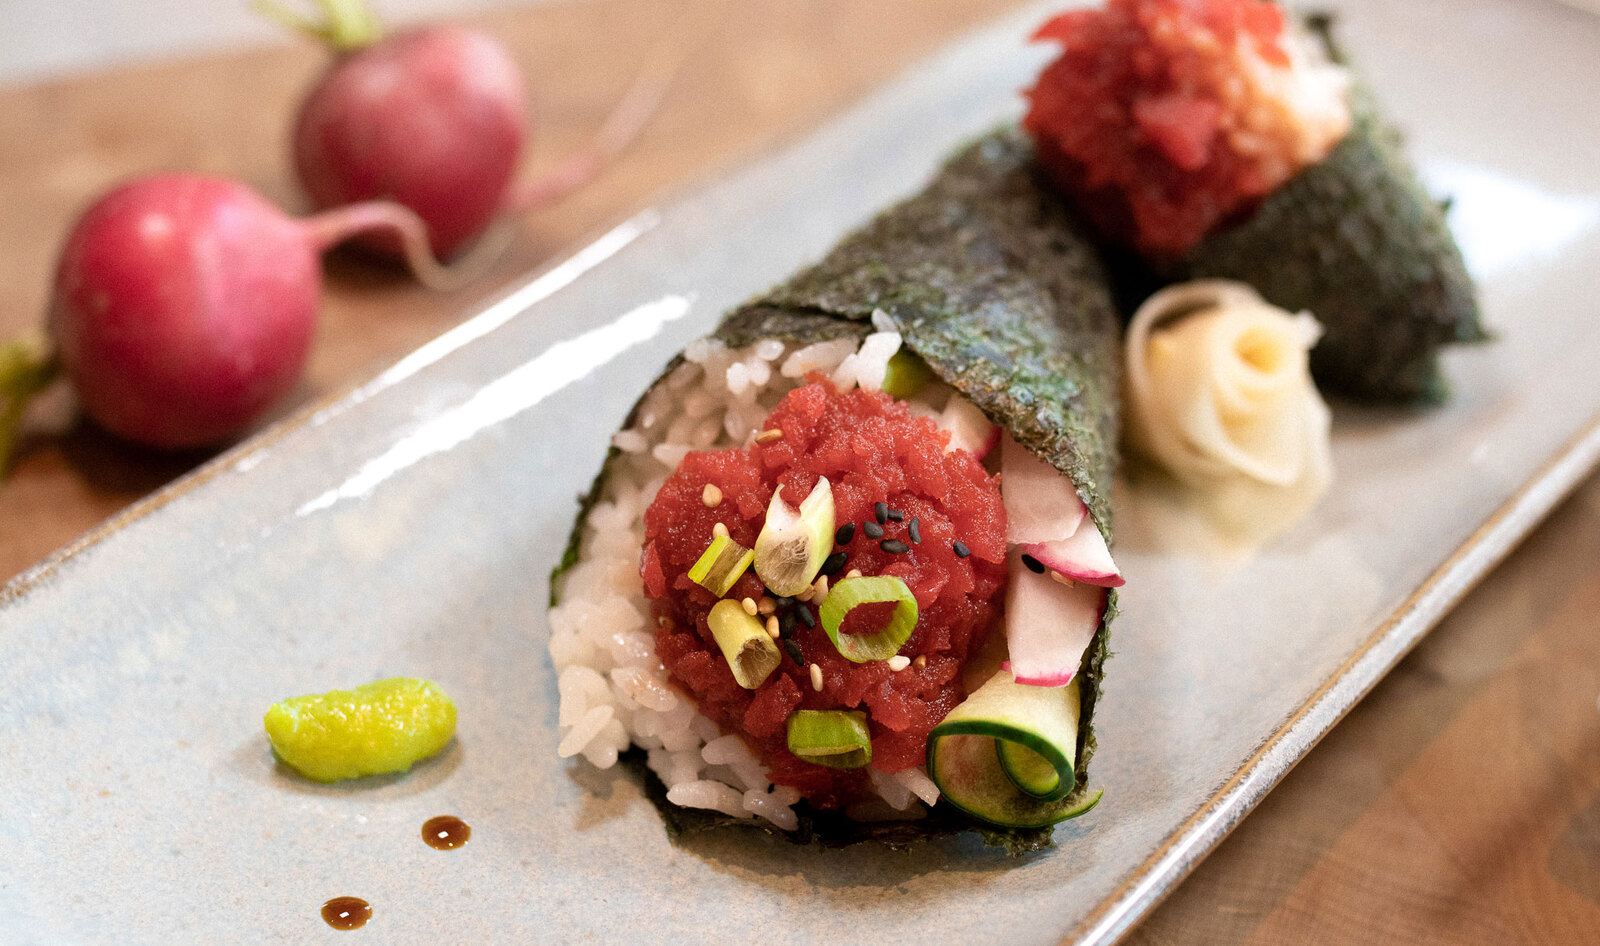 How This New Vegan Bluefin Tuna Provides an Ocean Sustainability Solution